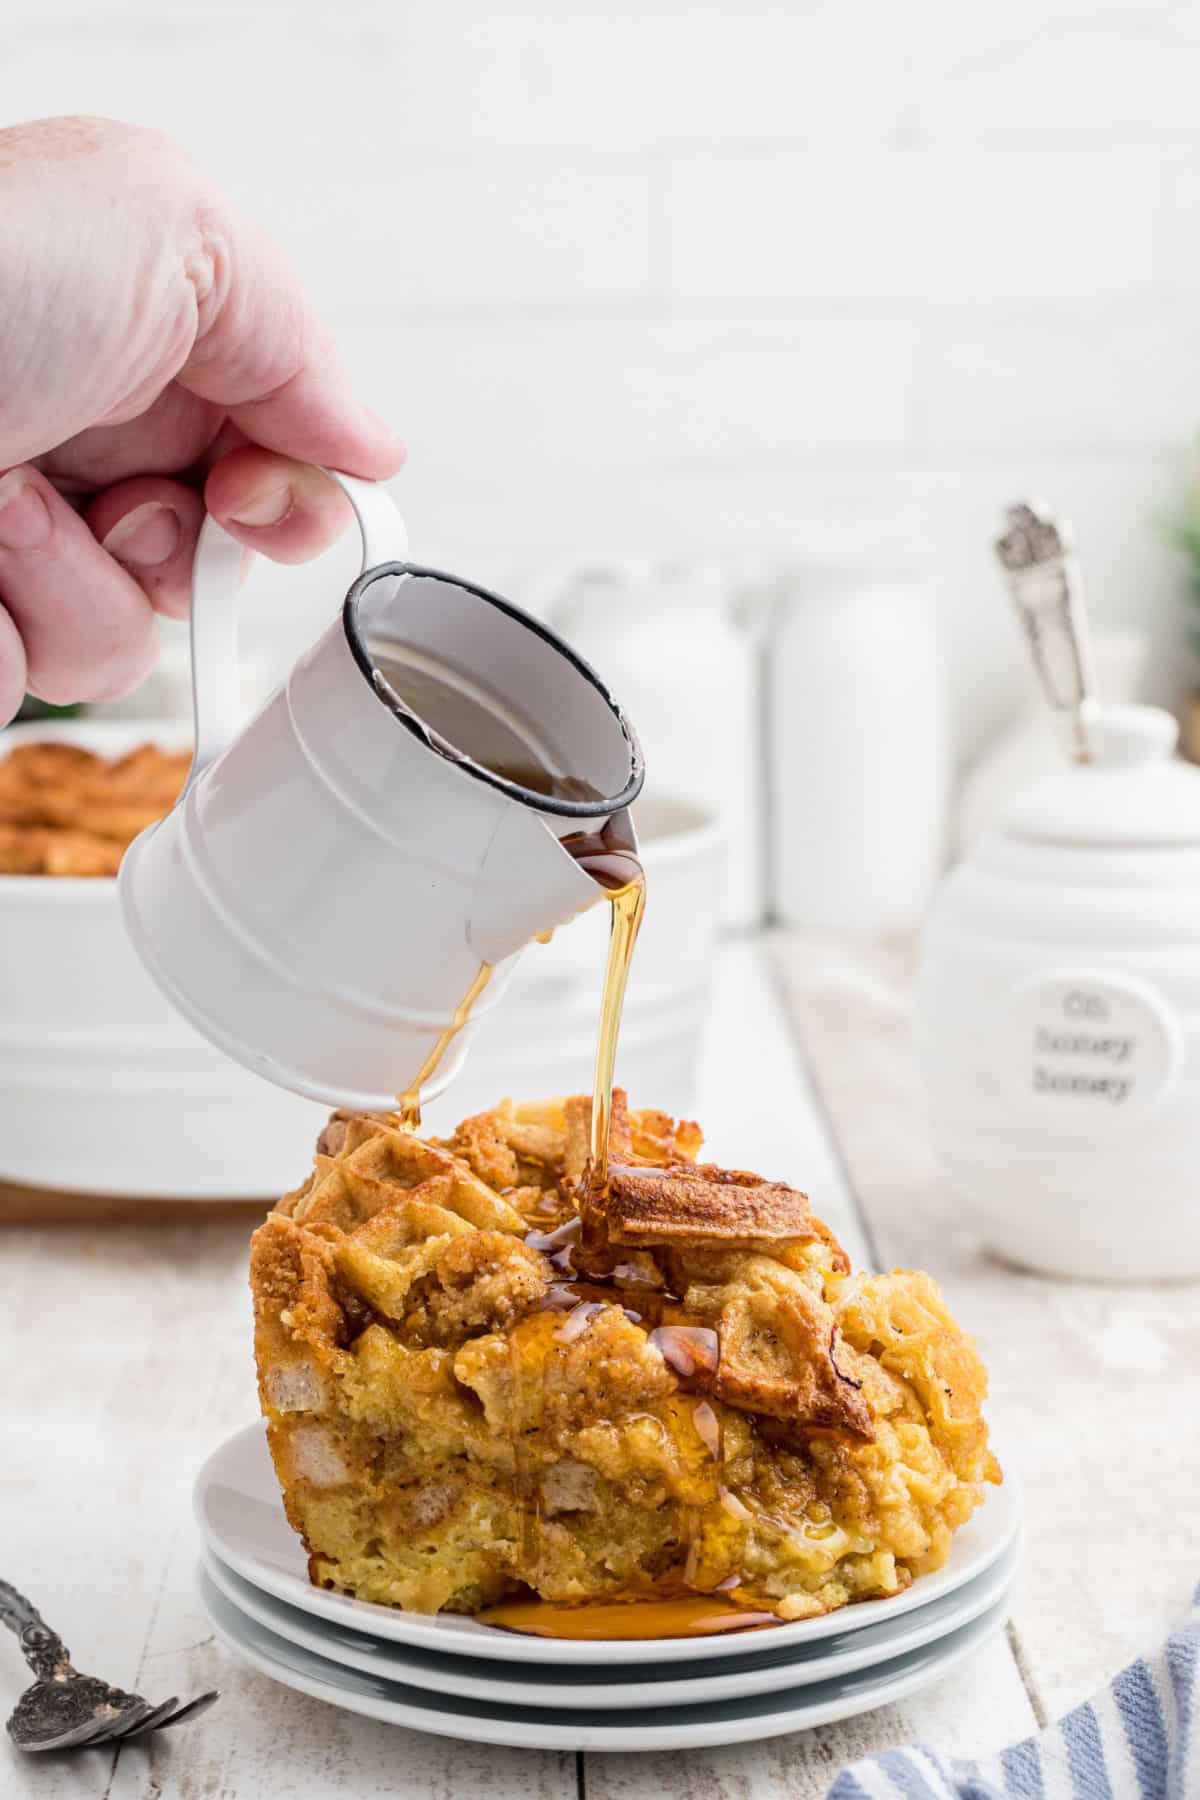 Syrup being poured over a piece of chicken and waffle casserole.